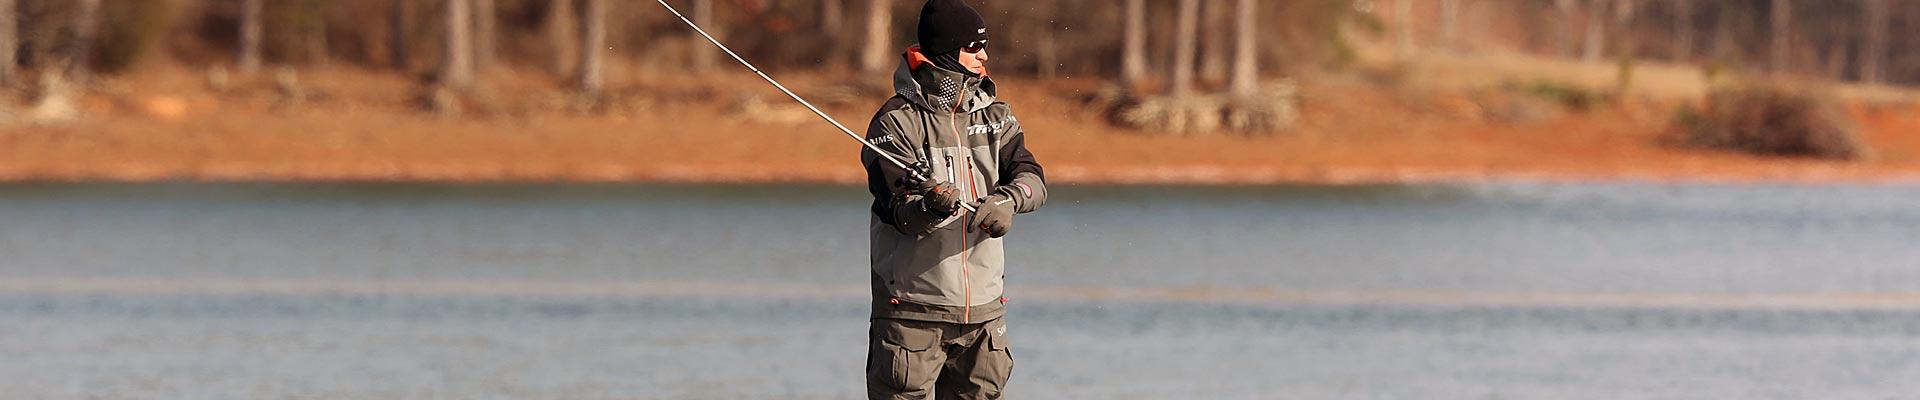 7 Soft-Plastic Lures That Catch Bass In Cold Water